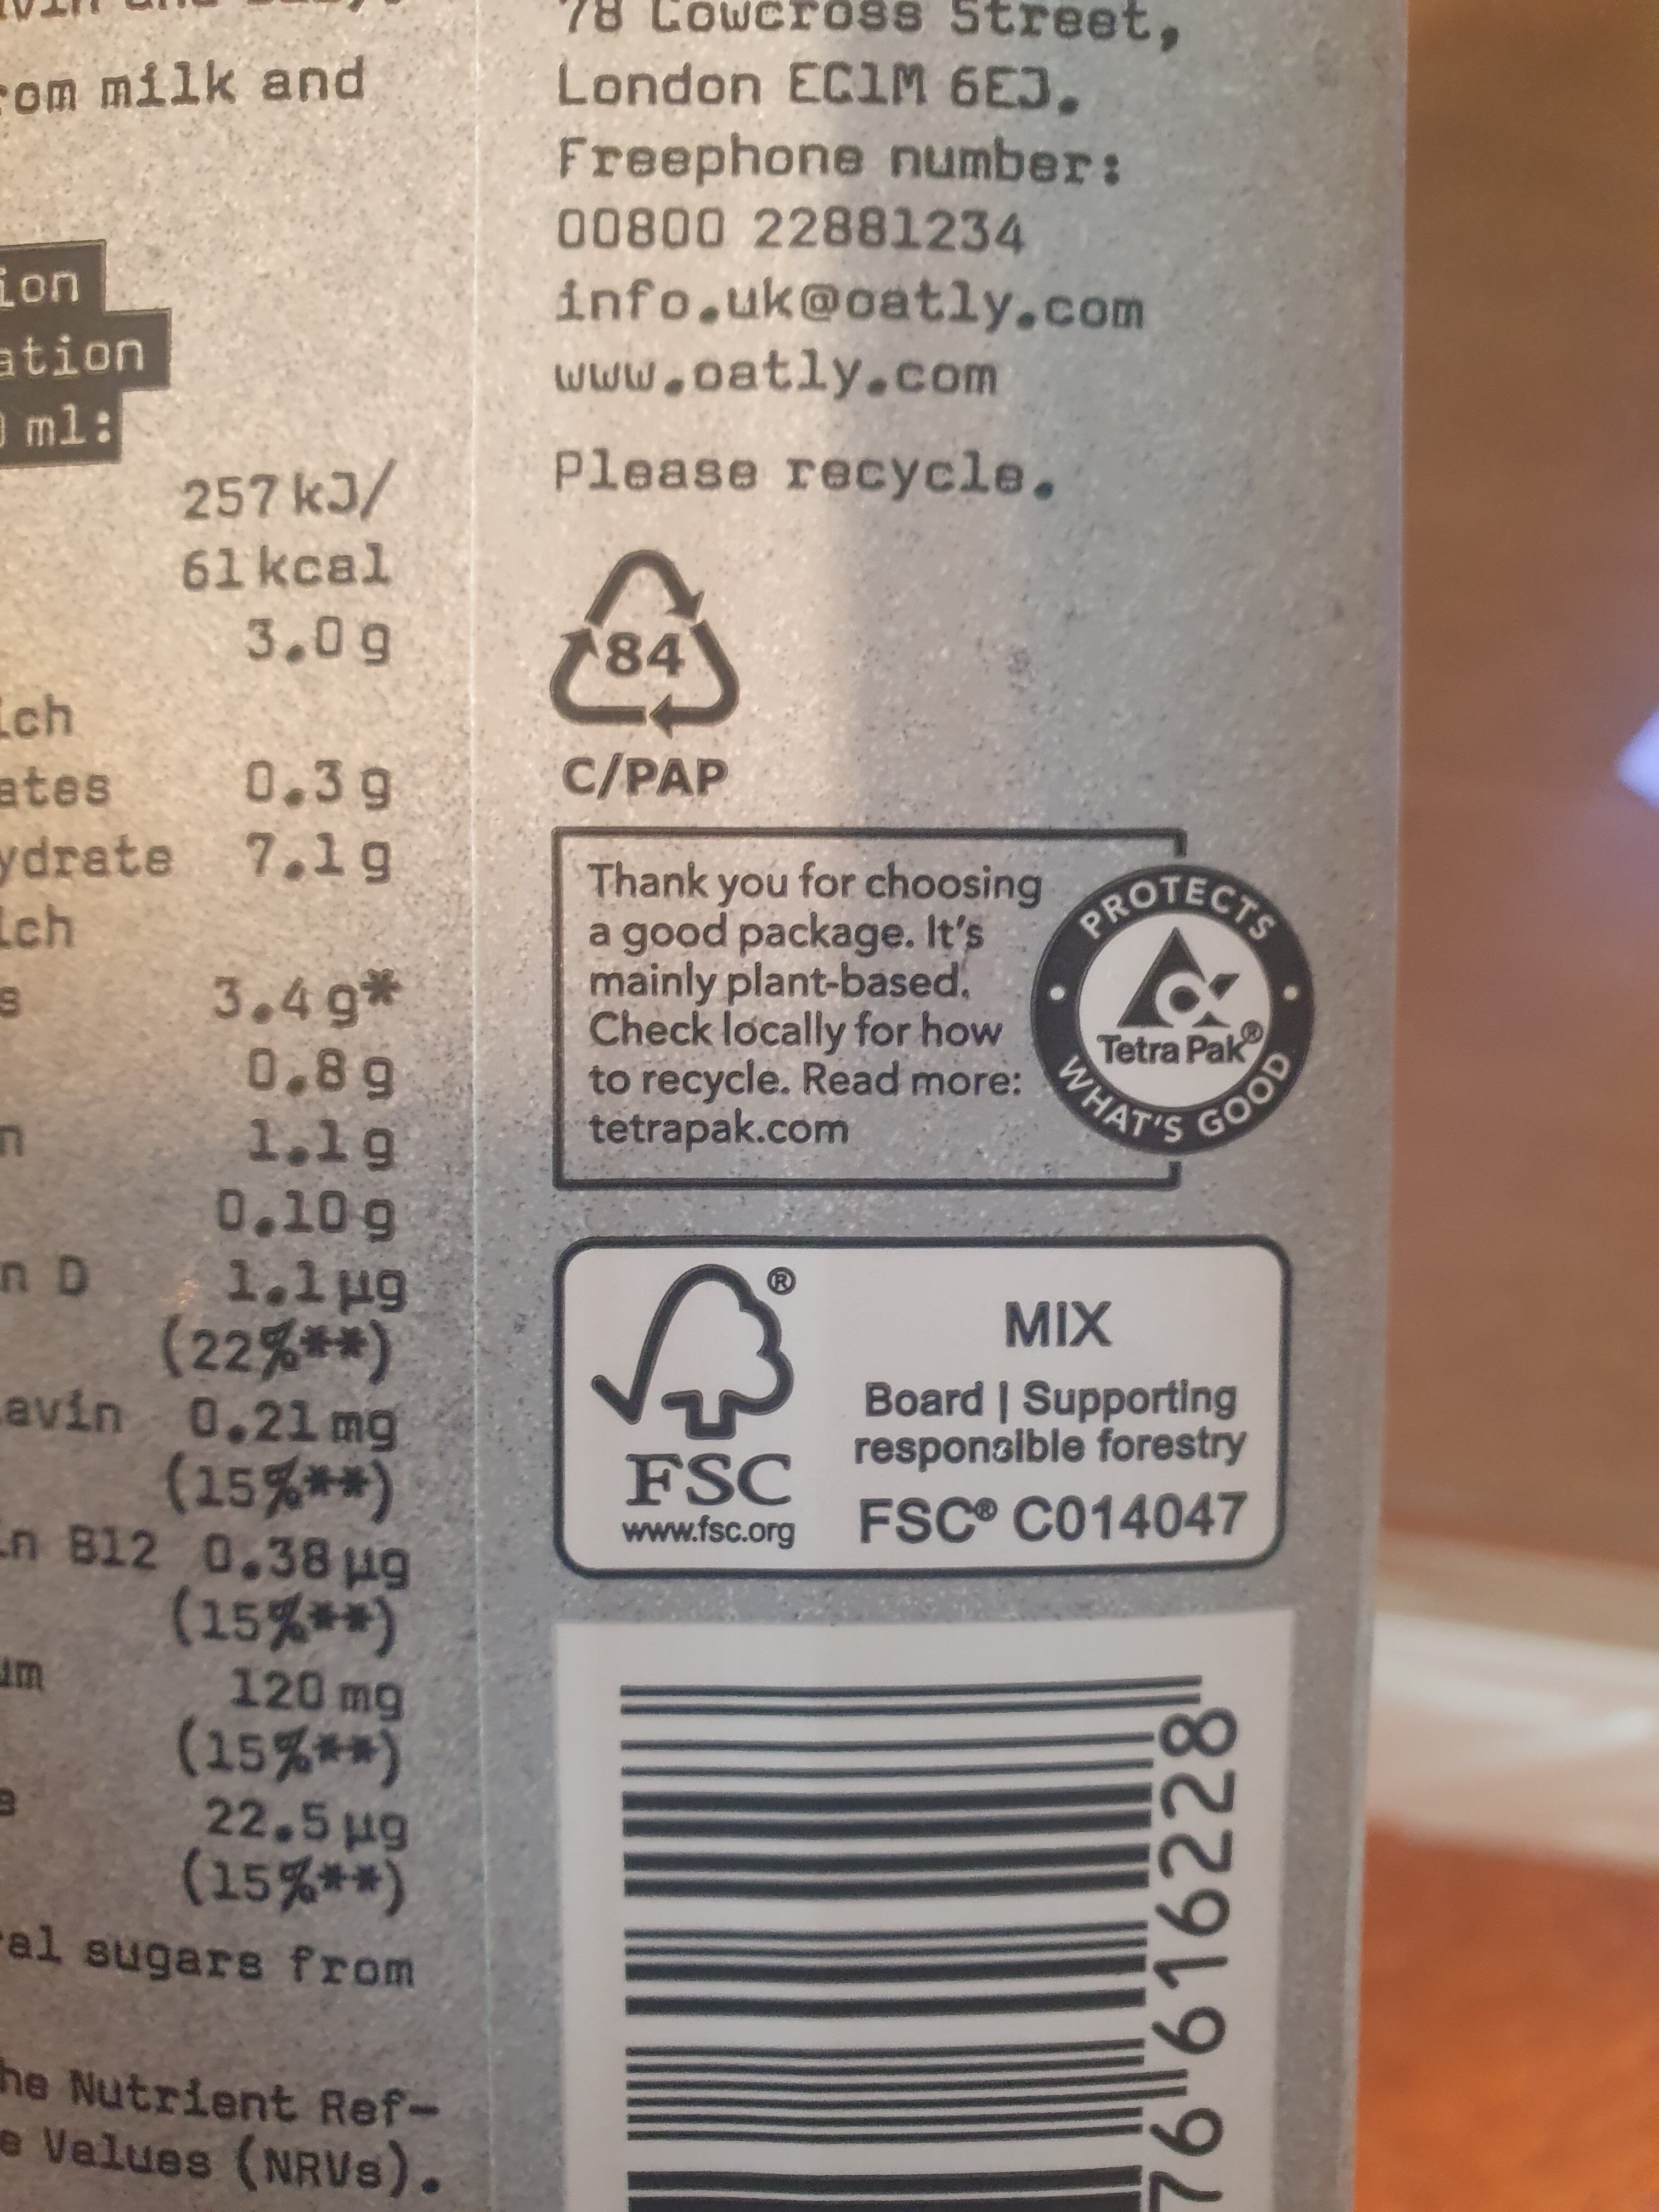 Oat drink barista edition - Recycling instructions and/or packaging information